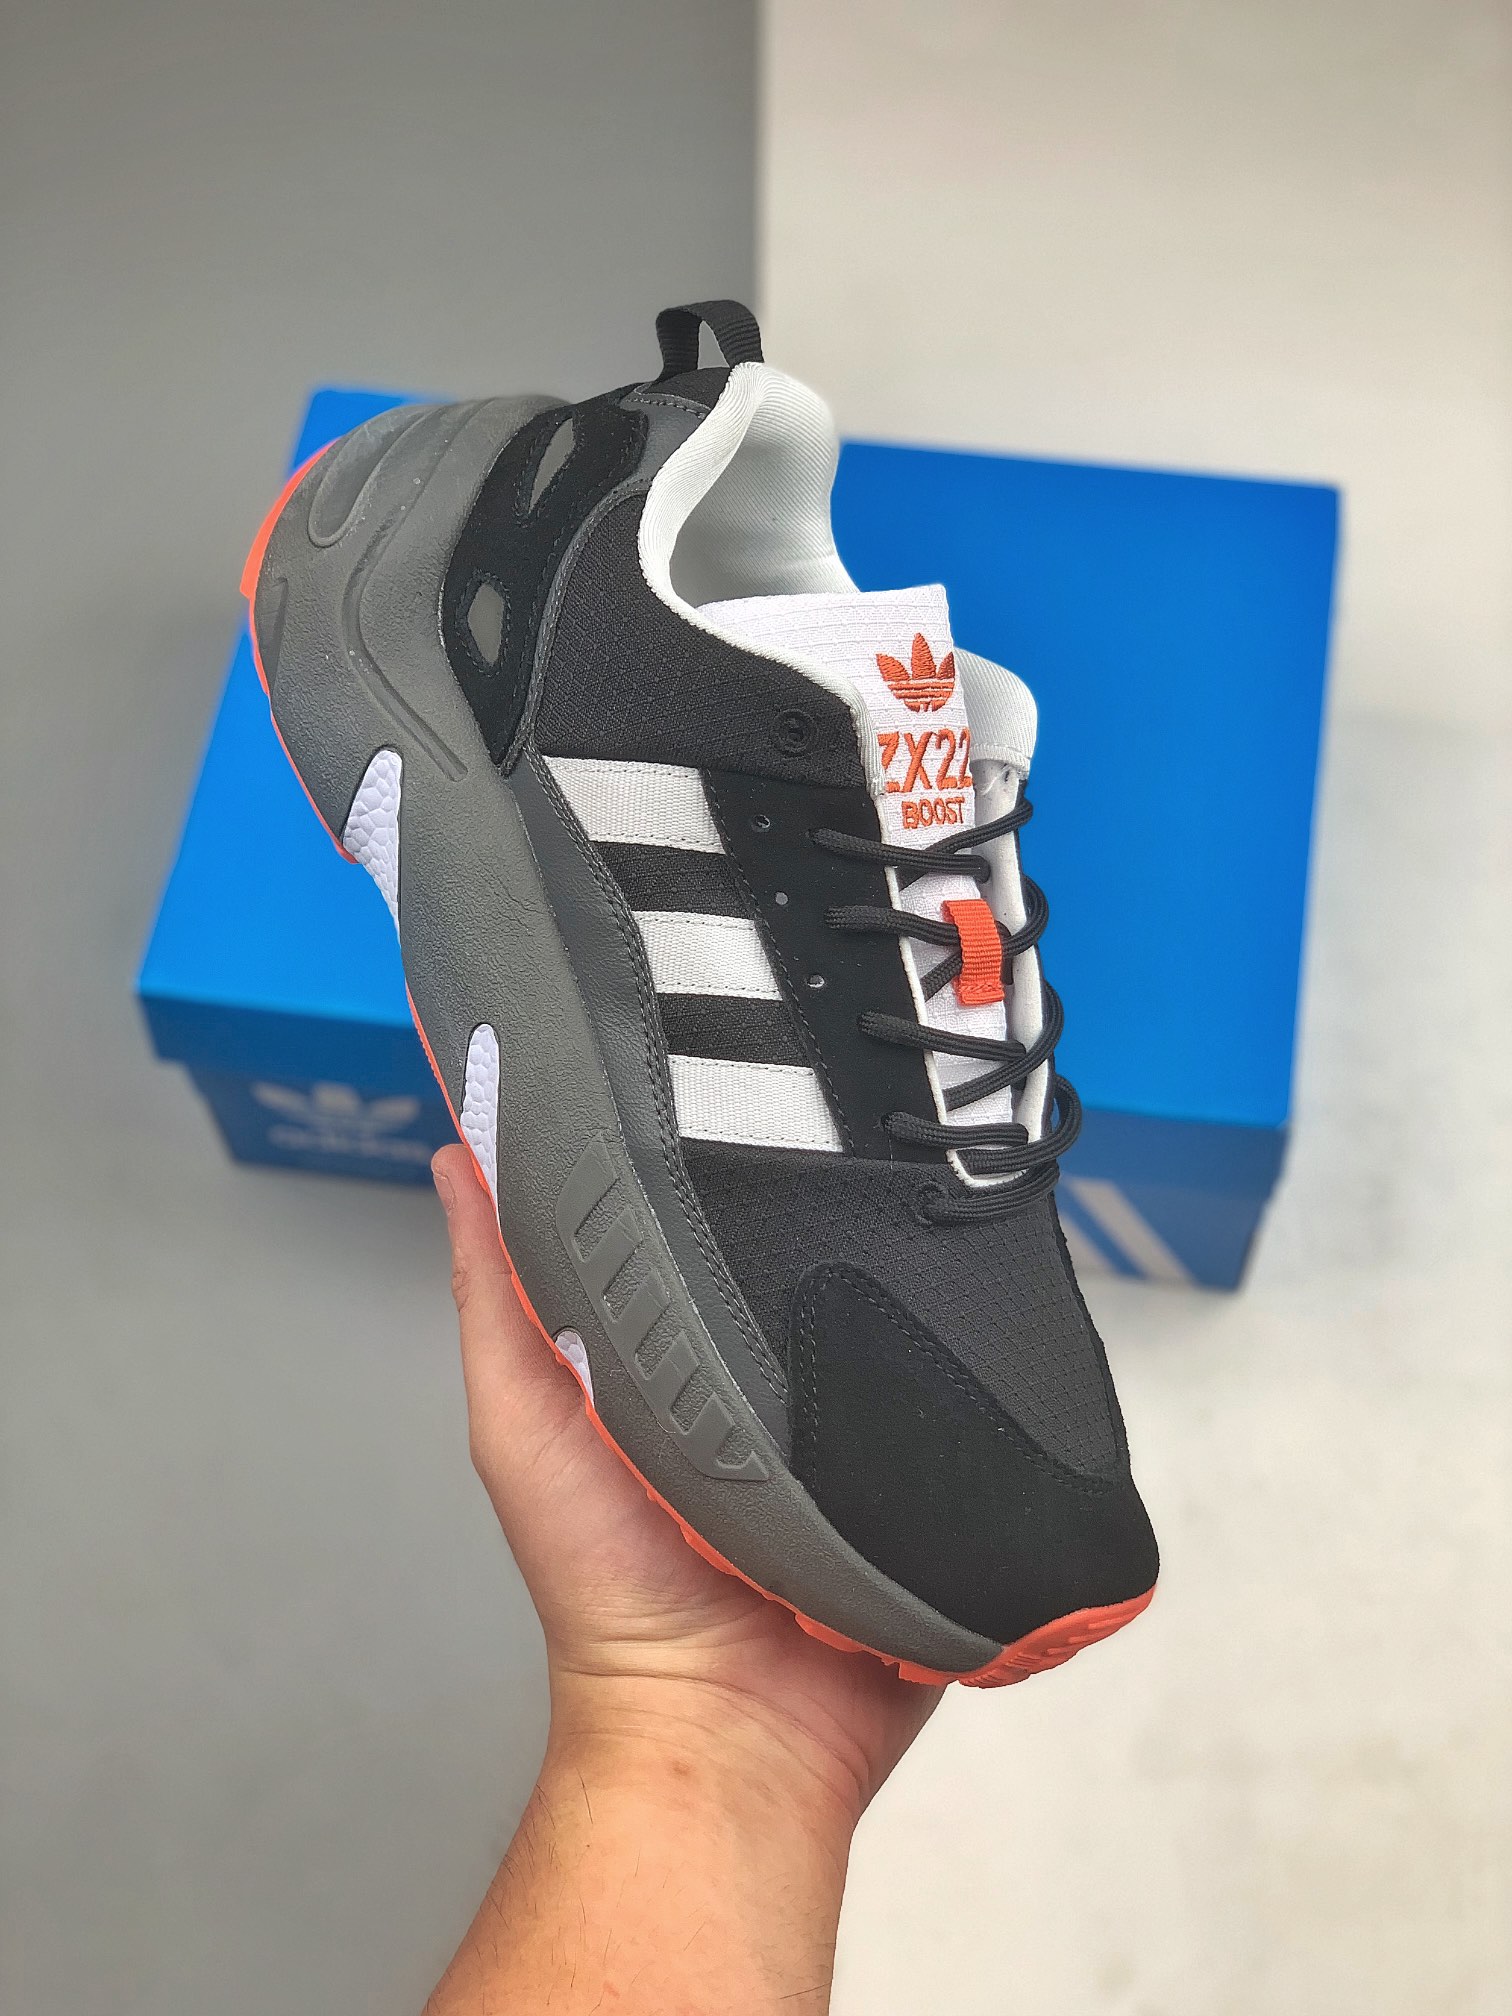 Adidas ZX 22 Boost Black Grey GX8662 - Stylish and Comfortable Sneakers